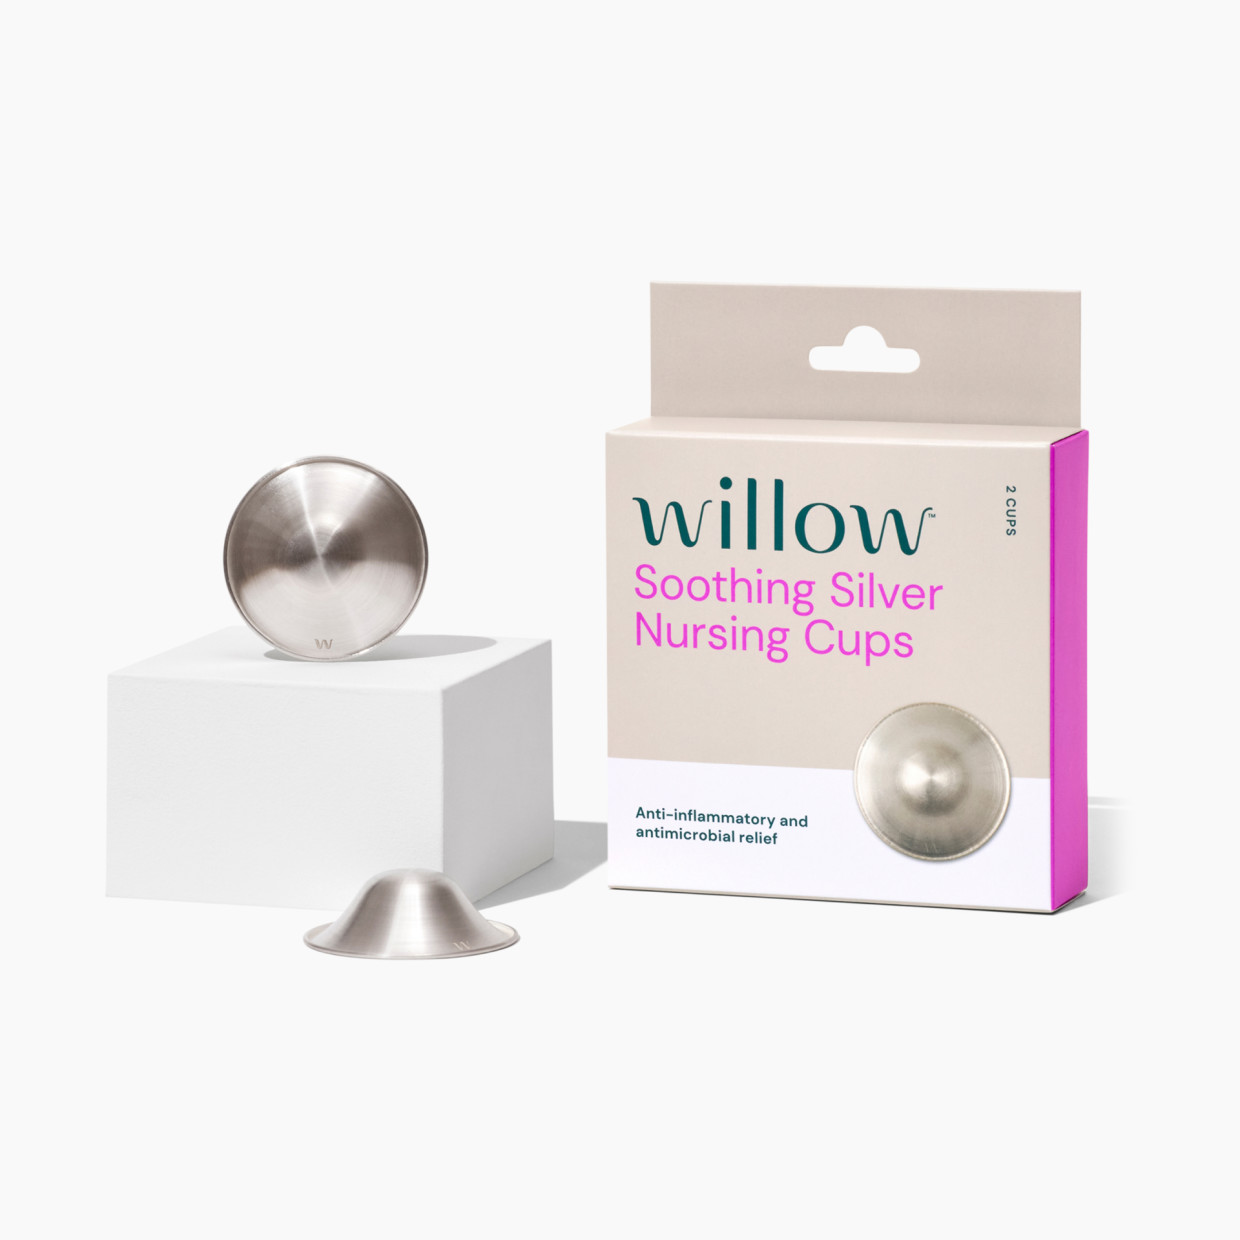 Willow Soothing Silver Nursing Cups (2 Pack).